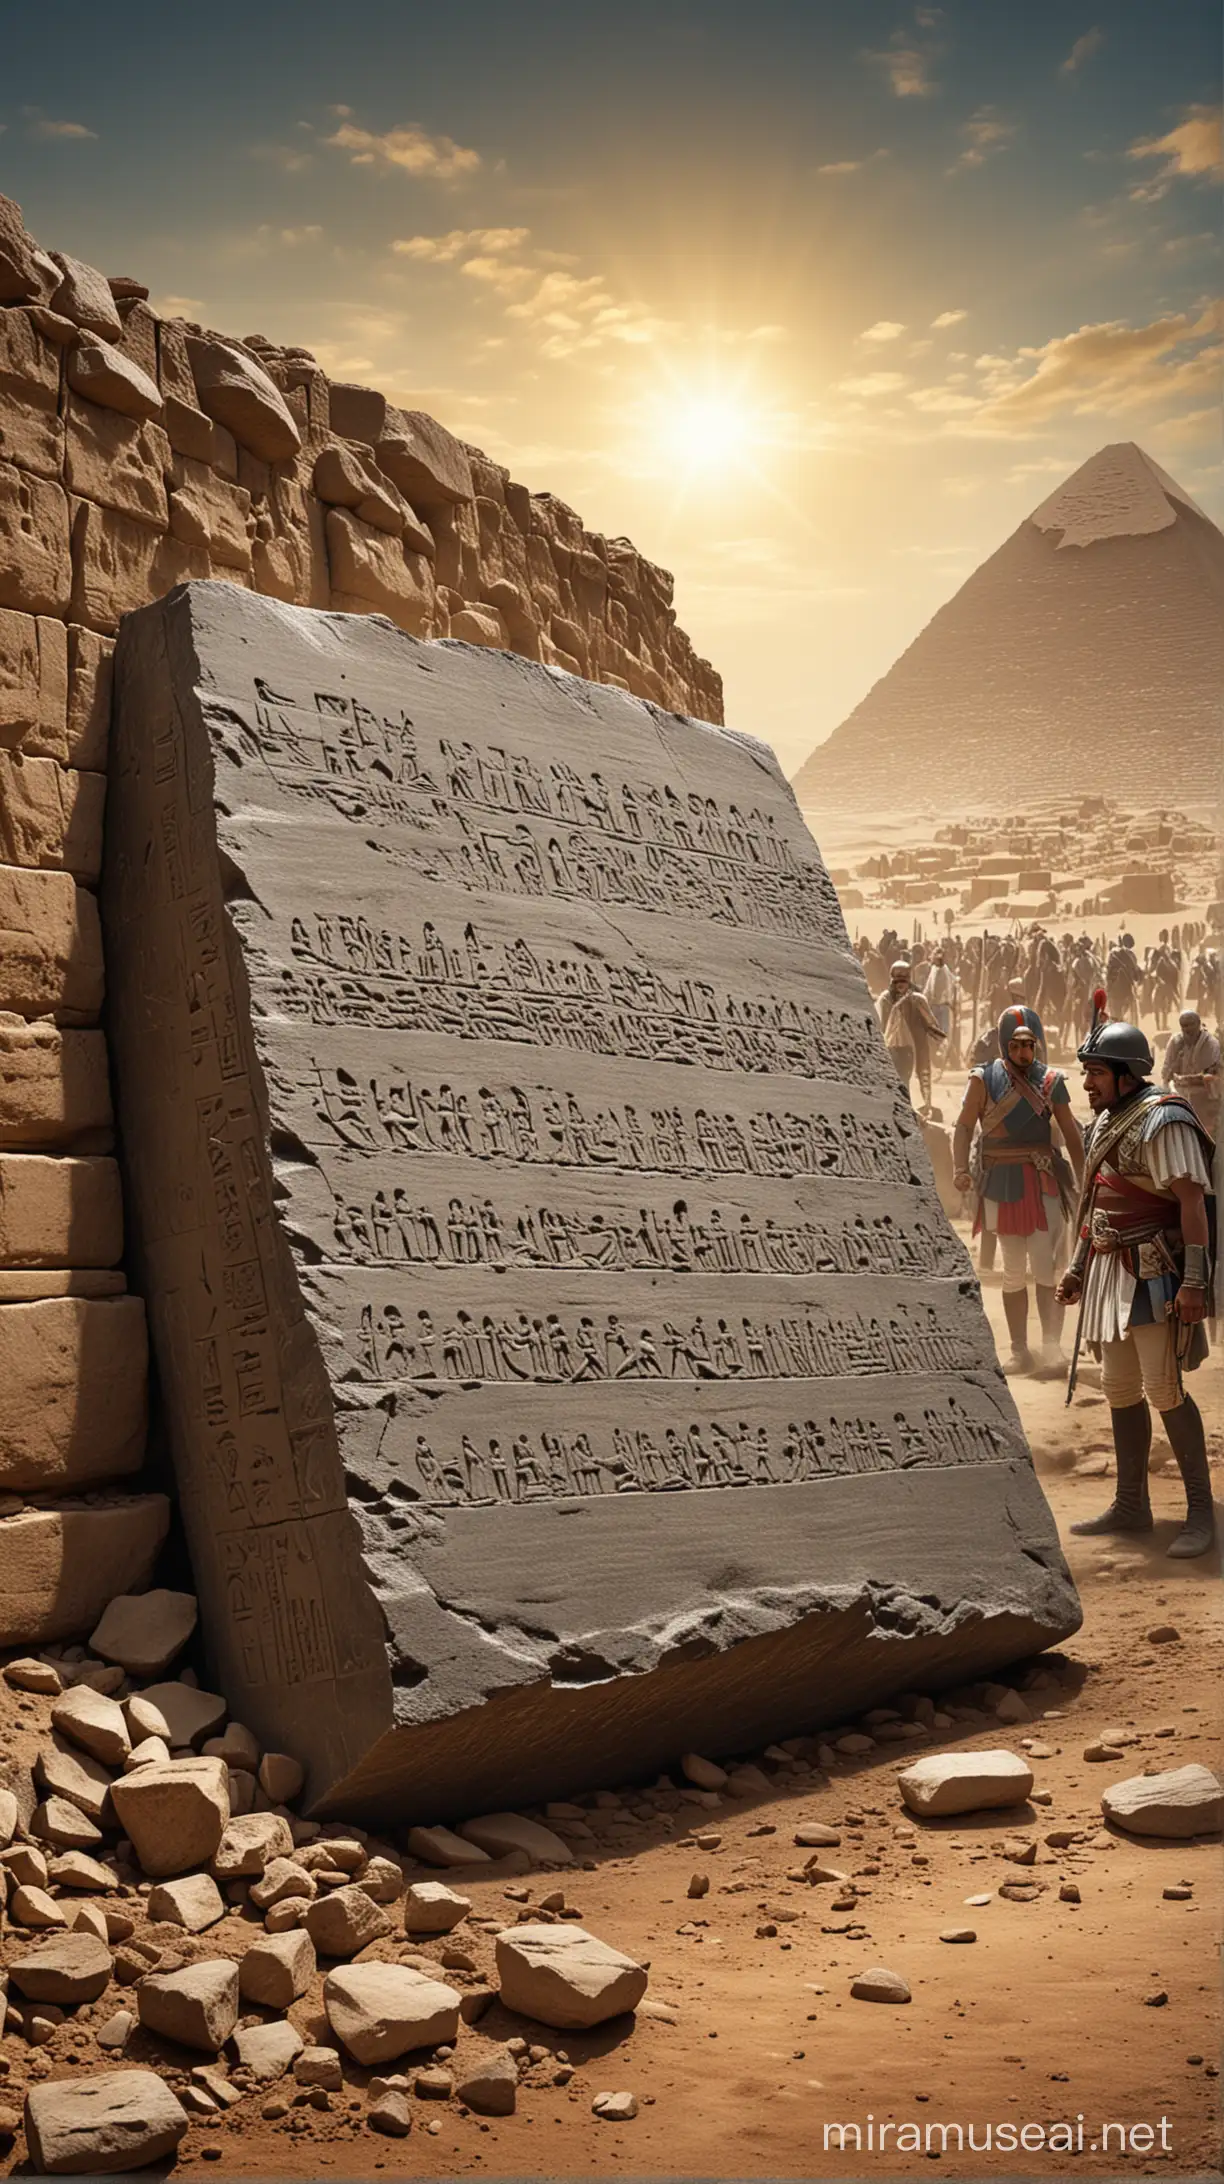 I would like a depiction of the moment when Napoleon's soldiers discovered the Rosetta Stone in Egypt in 1799. The scene could be set in the ancient streets of Egypt, with soldiers excavating the stone. In the background, Napoleon's army can be seen, while in the foreground, a group of soldiers and their leaders eagerly examine the stone. As a prominent feature, a stone, unmistakably a part of the Rosetta Stone, rises into the sky, evoking a sense of mystery and discovery.

